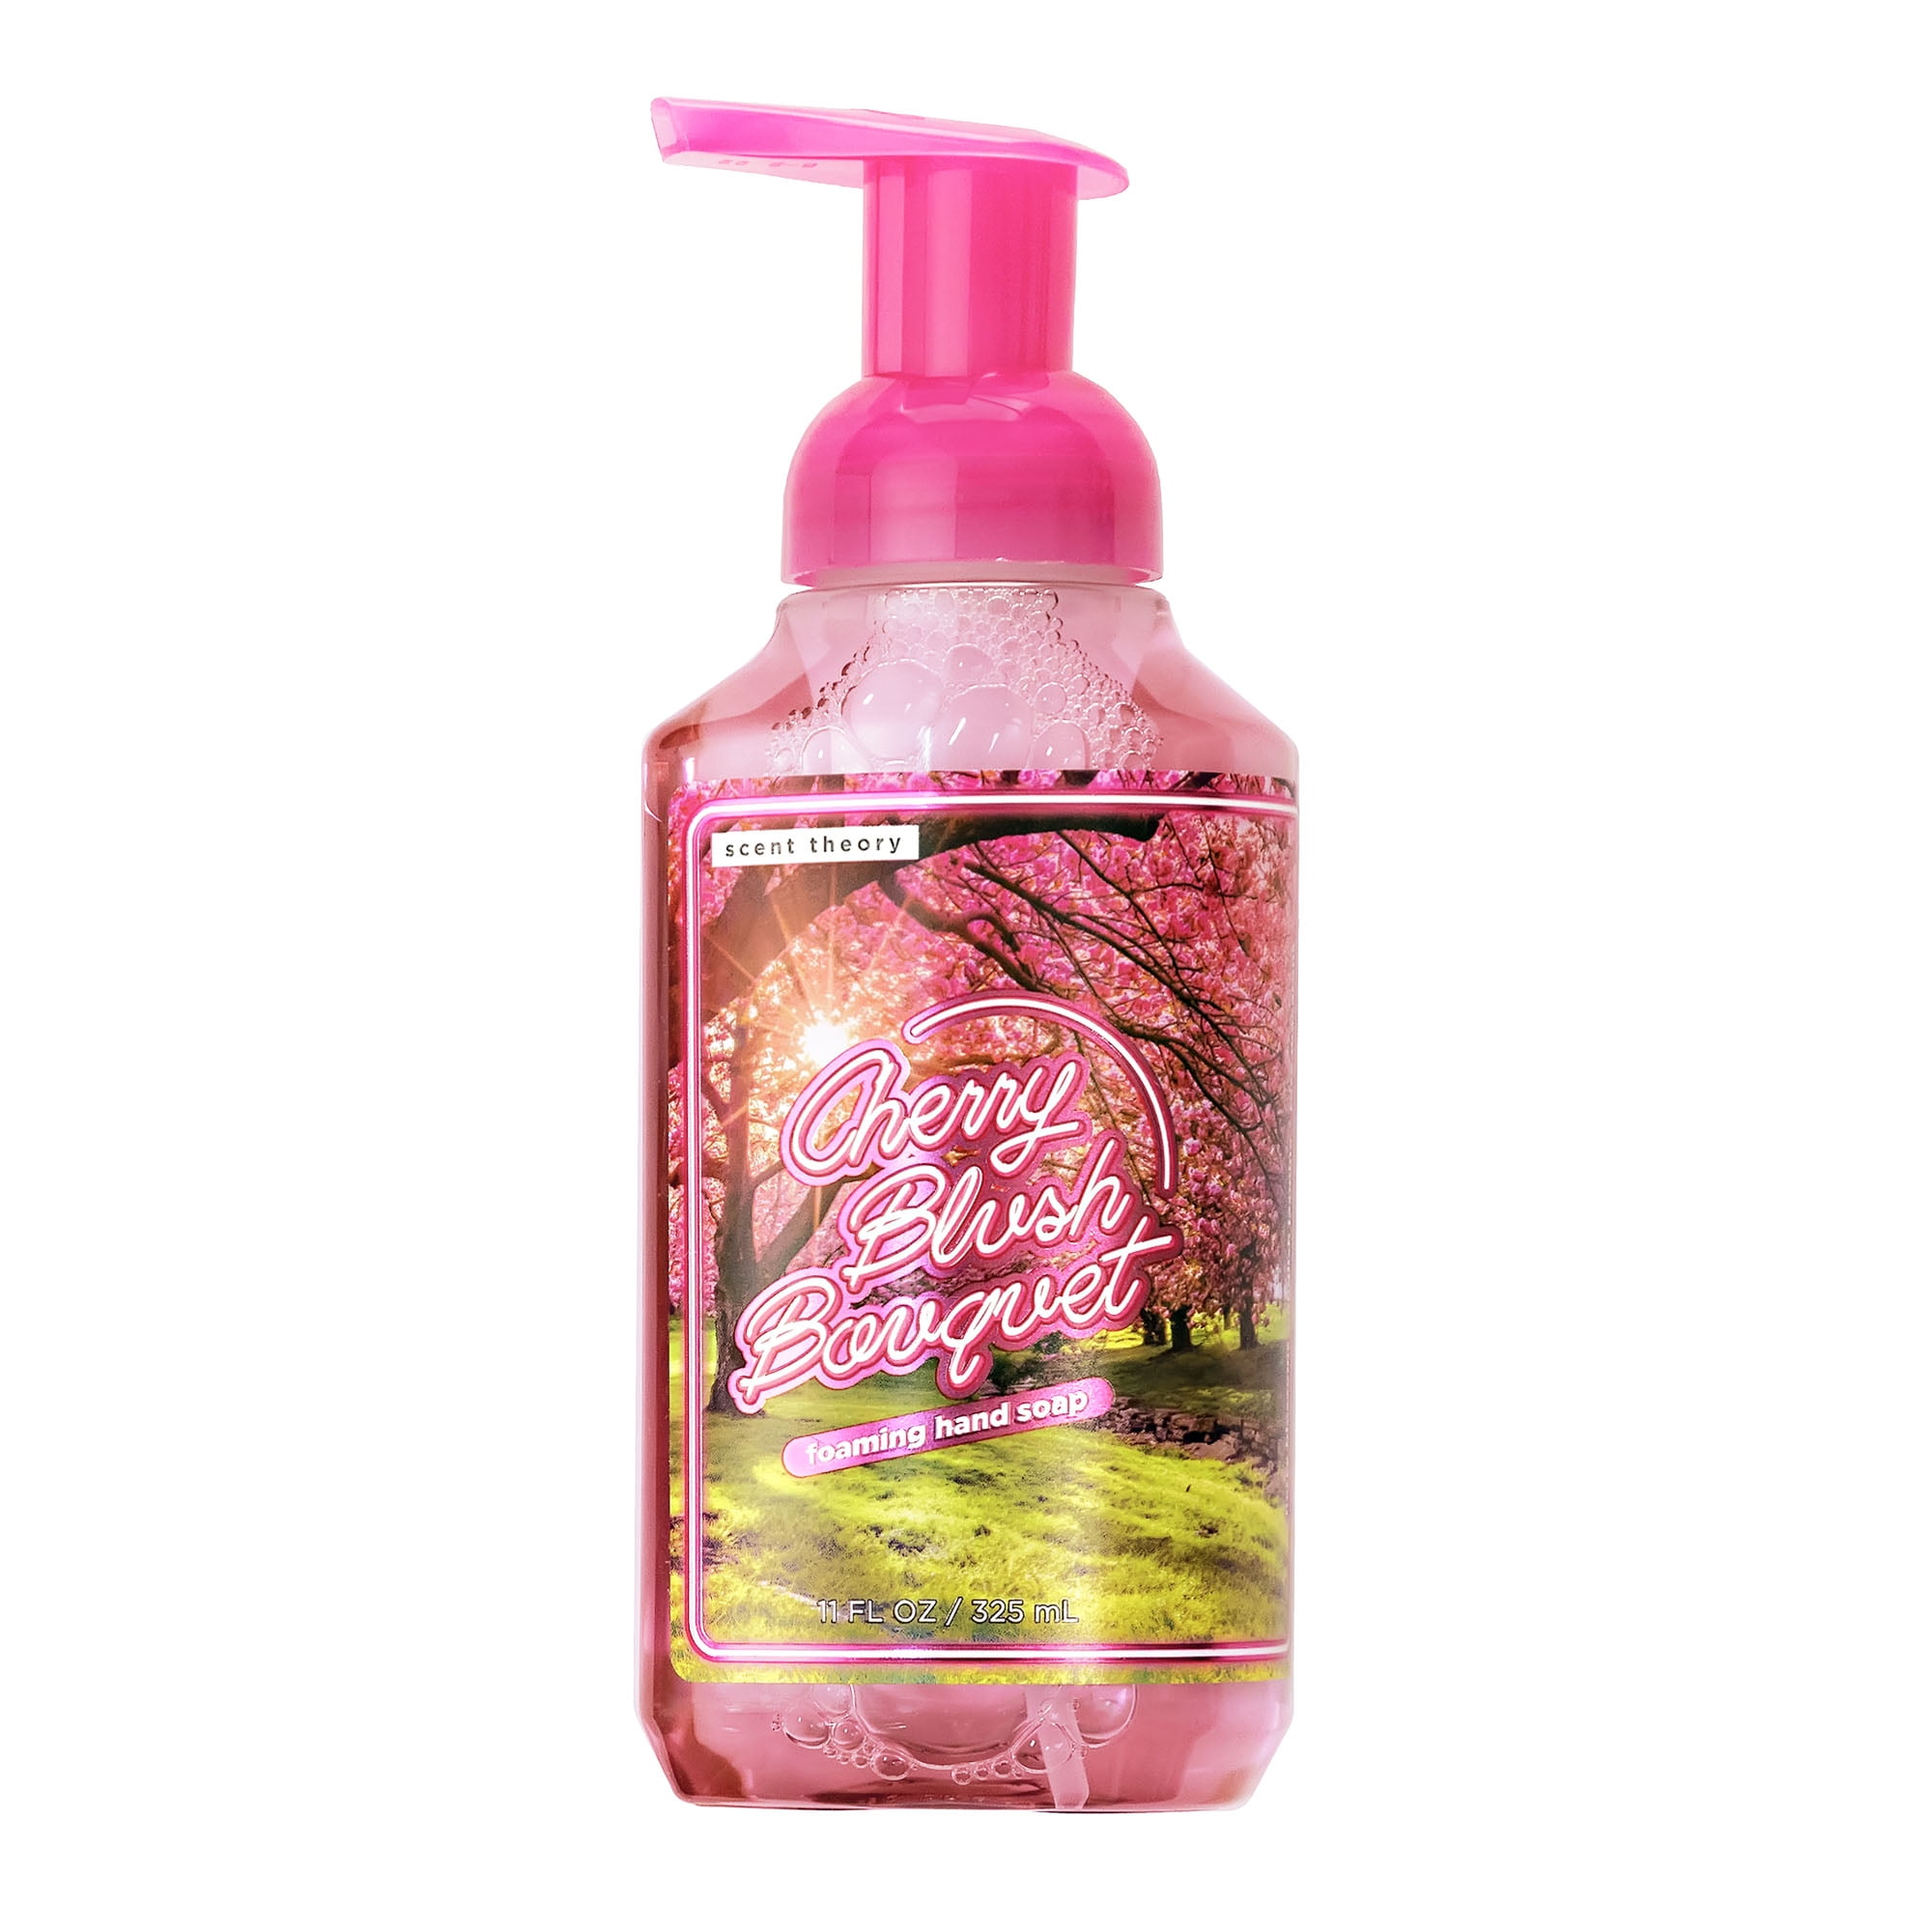 Scent Theory Foaming Hand Soap, Cherry Blush Bouquet, 11 oz